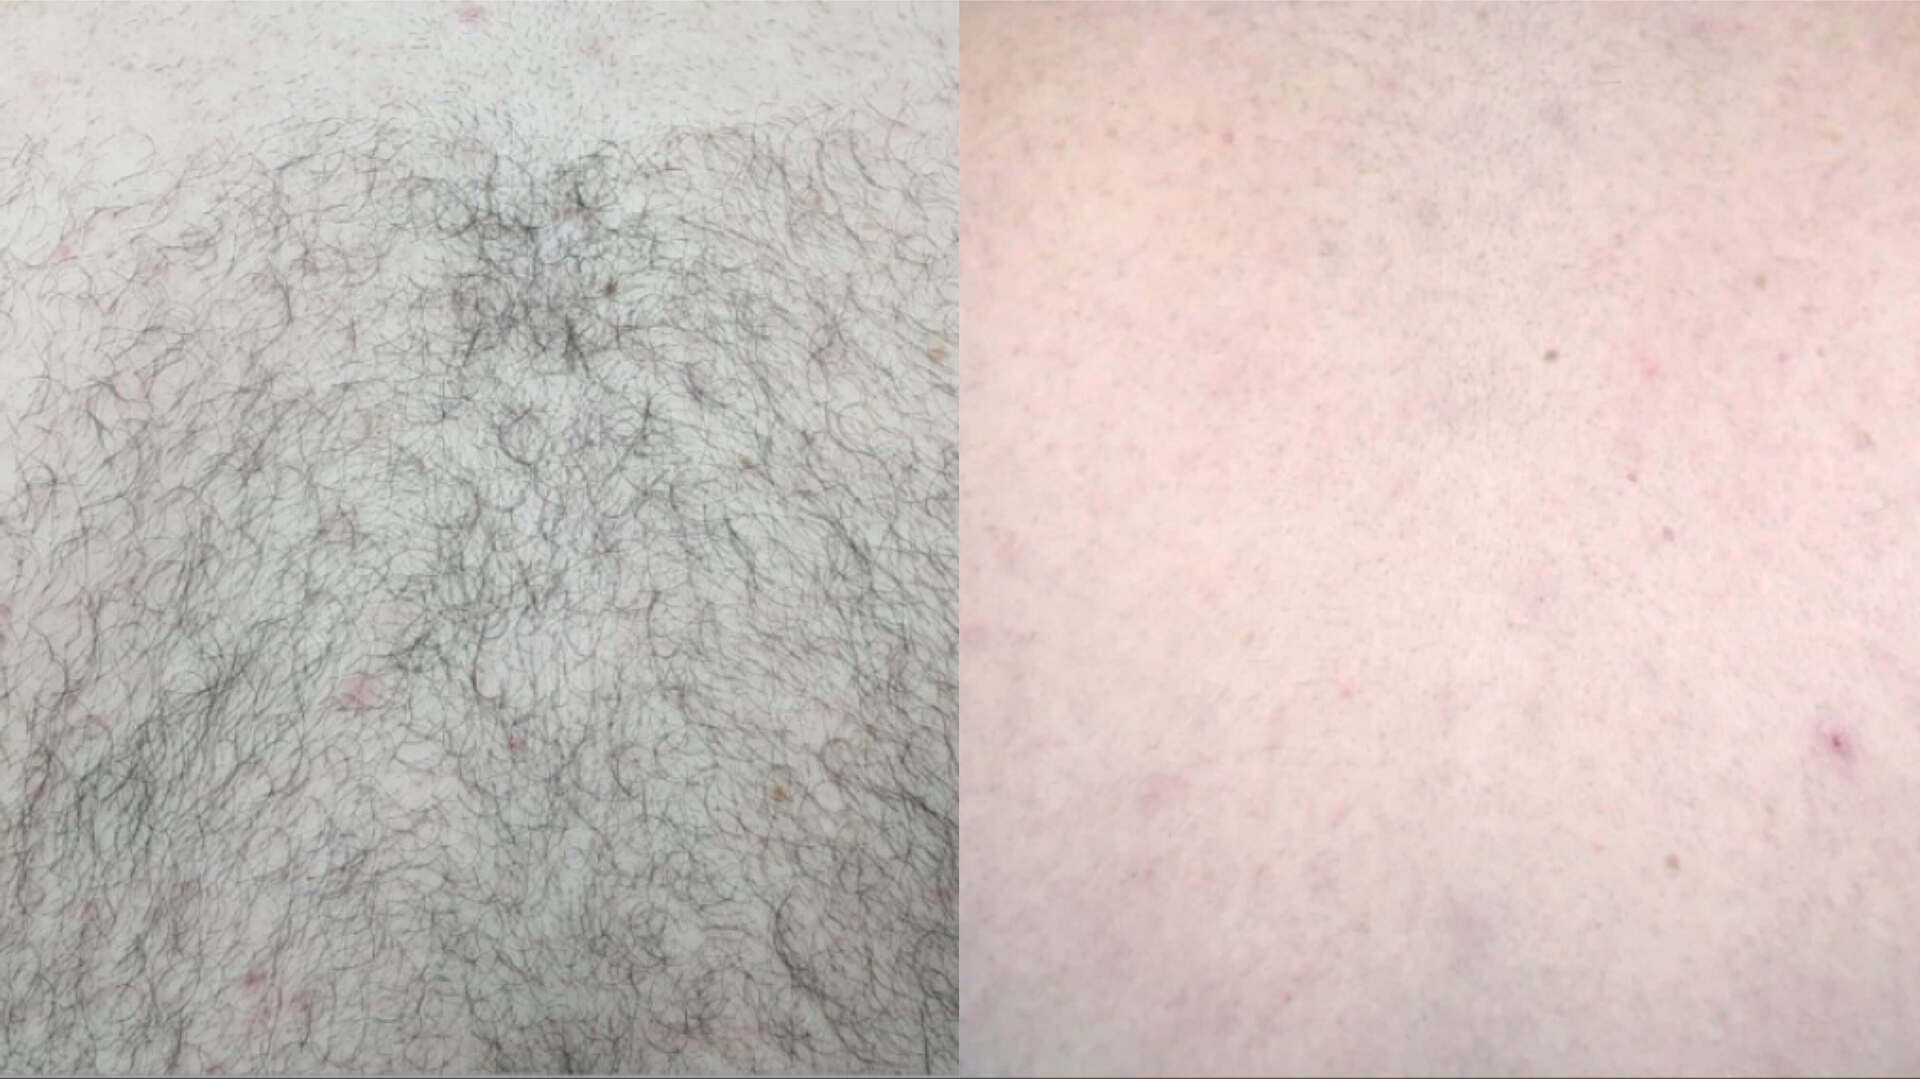 laser-hair-removal-before-after-1